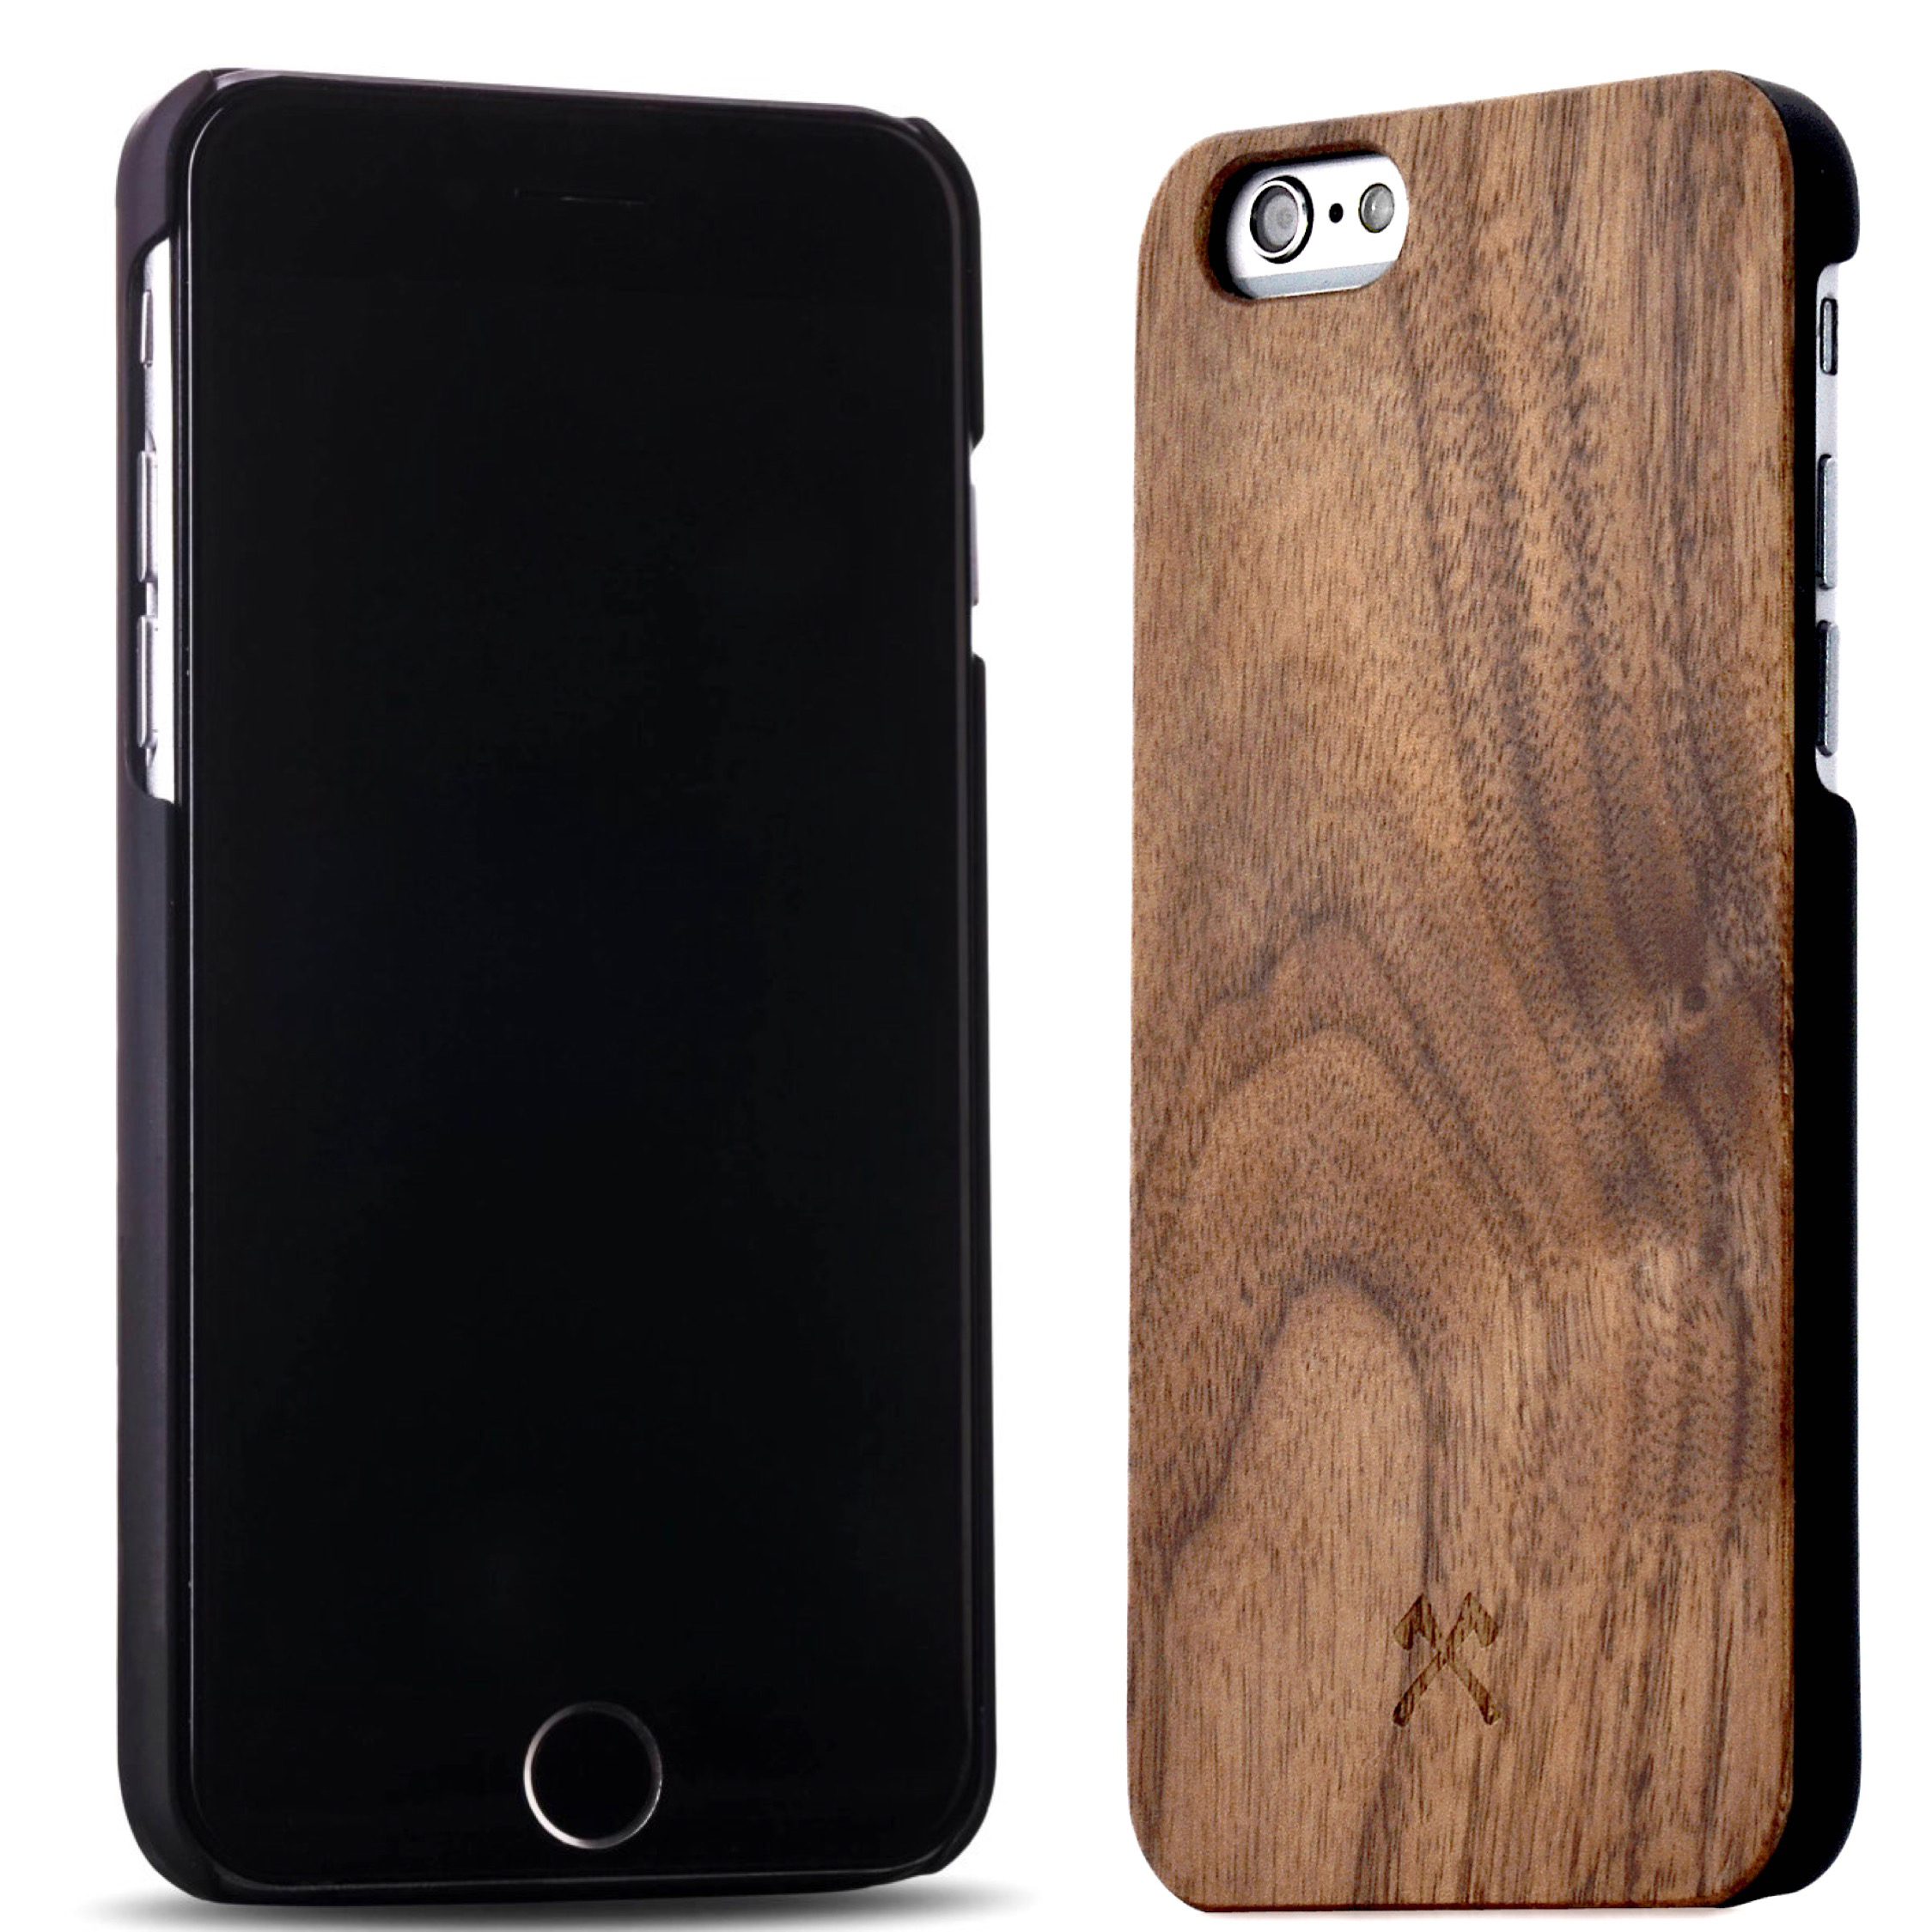 Classic, Walnuss/Schwarz iPhone 6, Backcover, EcoCase 6s, WOODCESSORIES iPhone Apple,